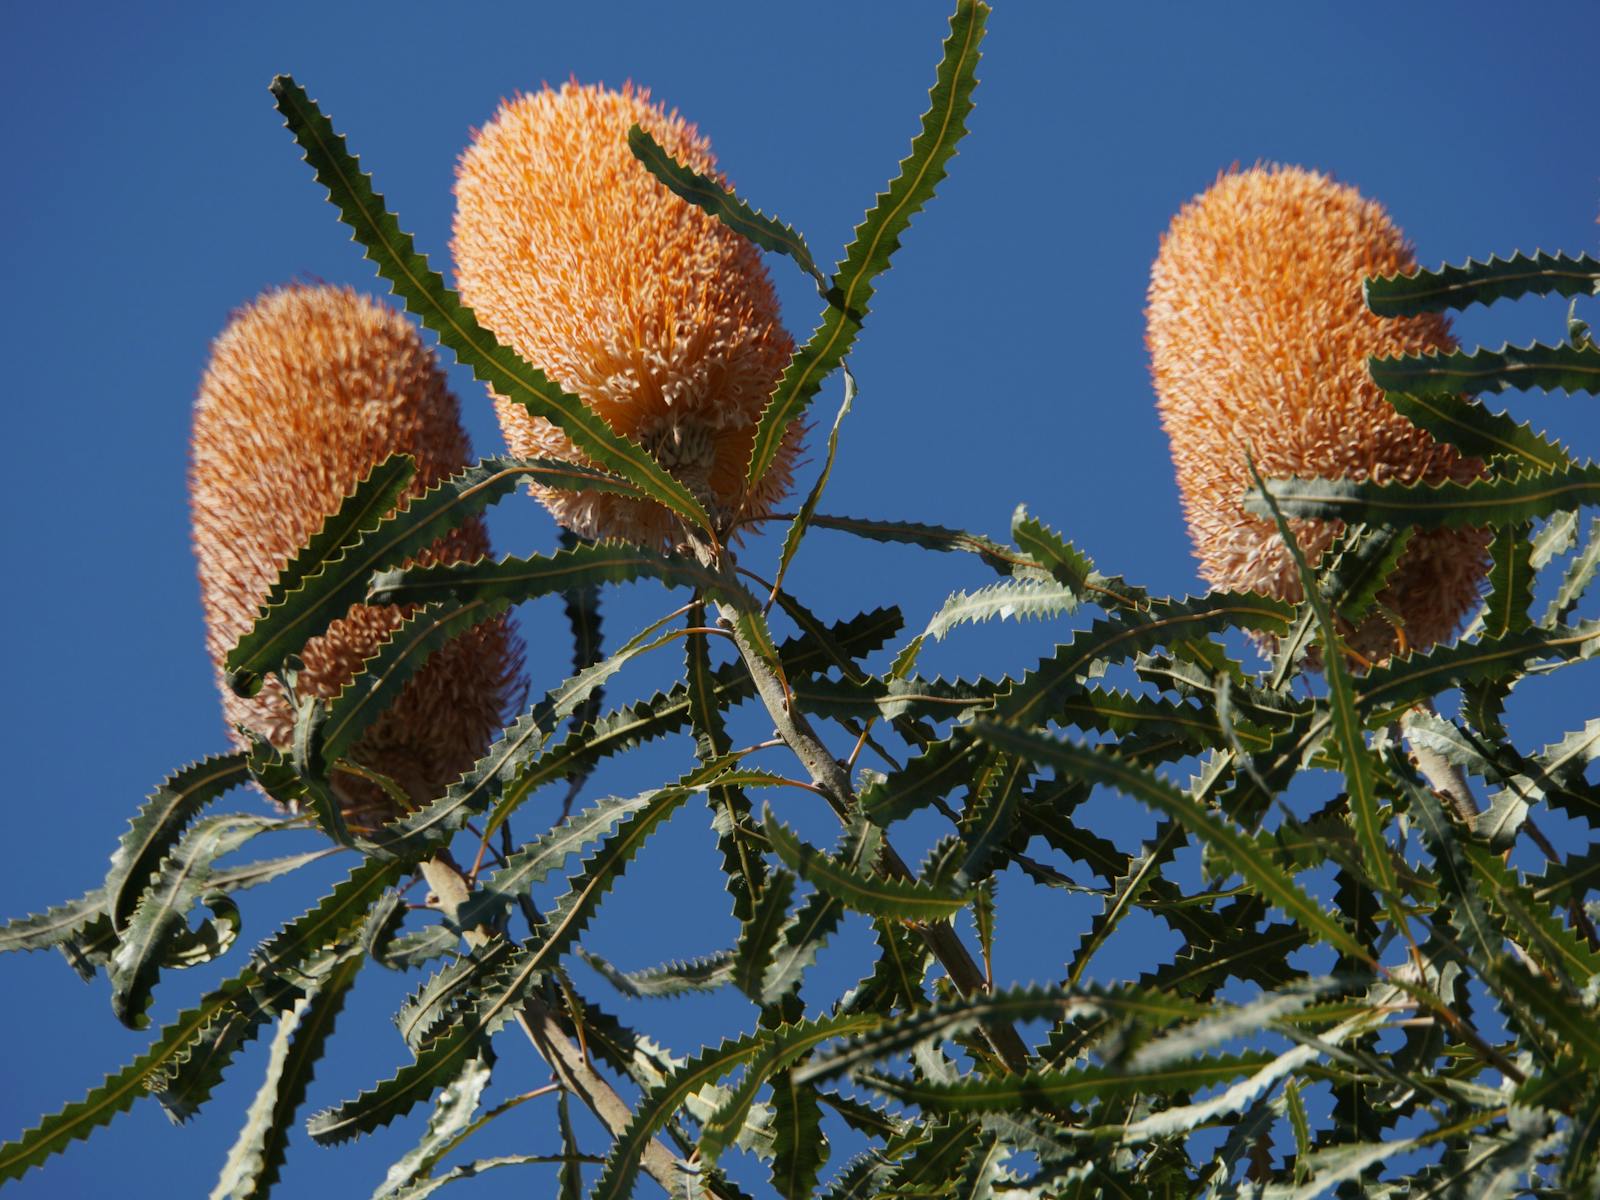 One of the many species of Banksia featuring throughout the year.